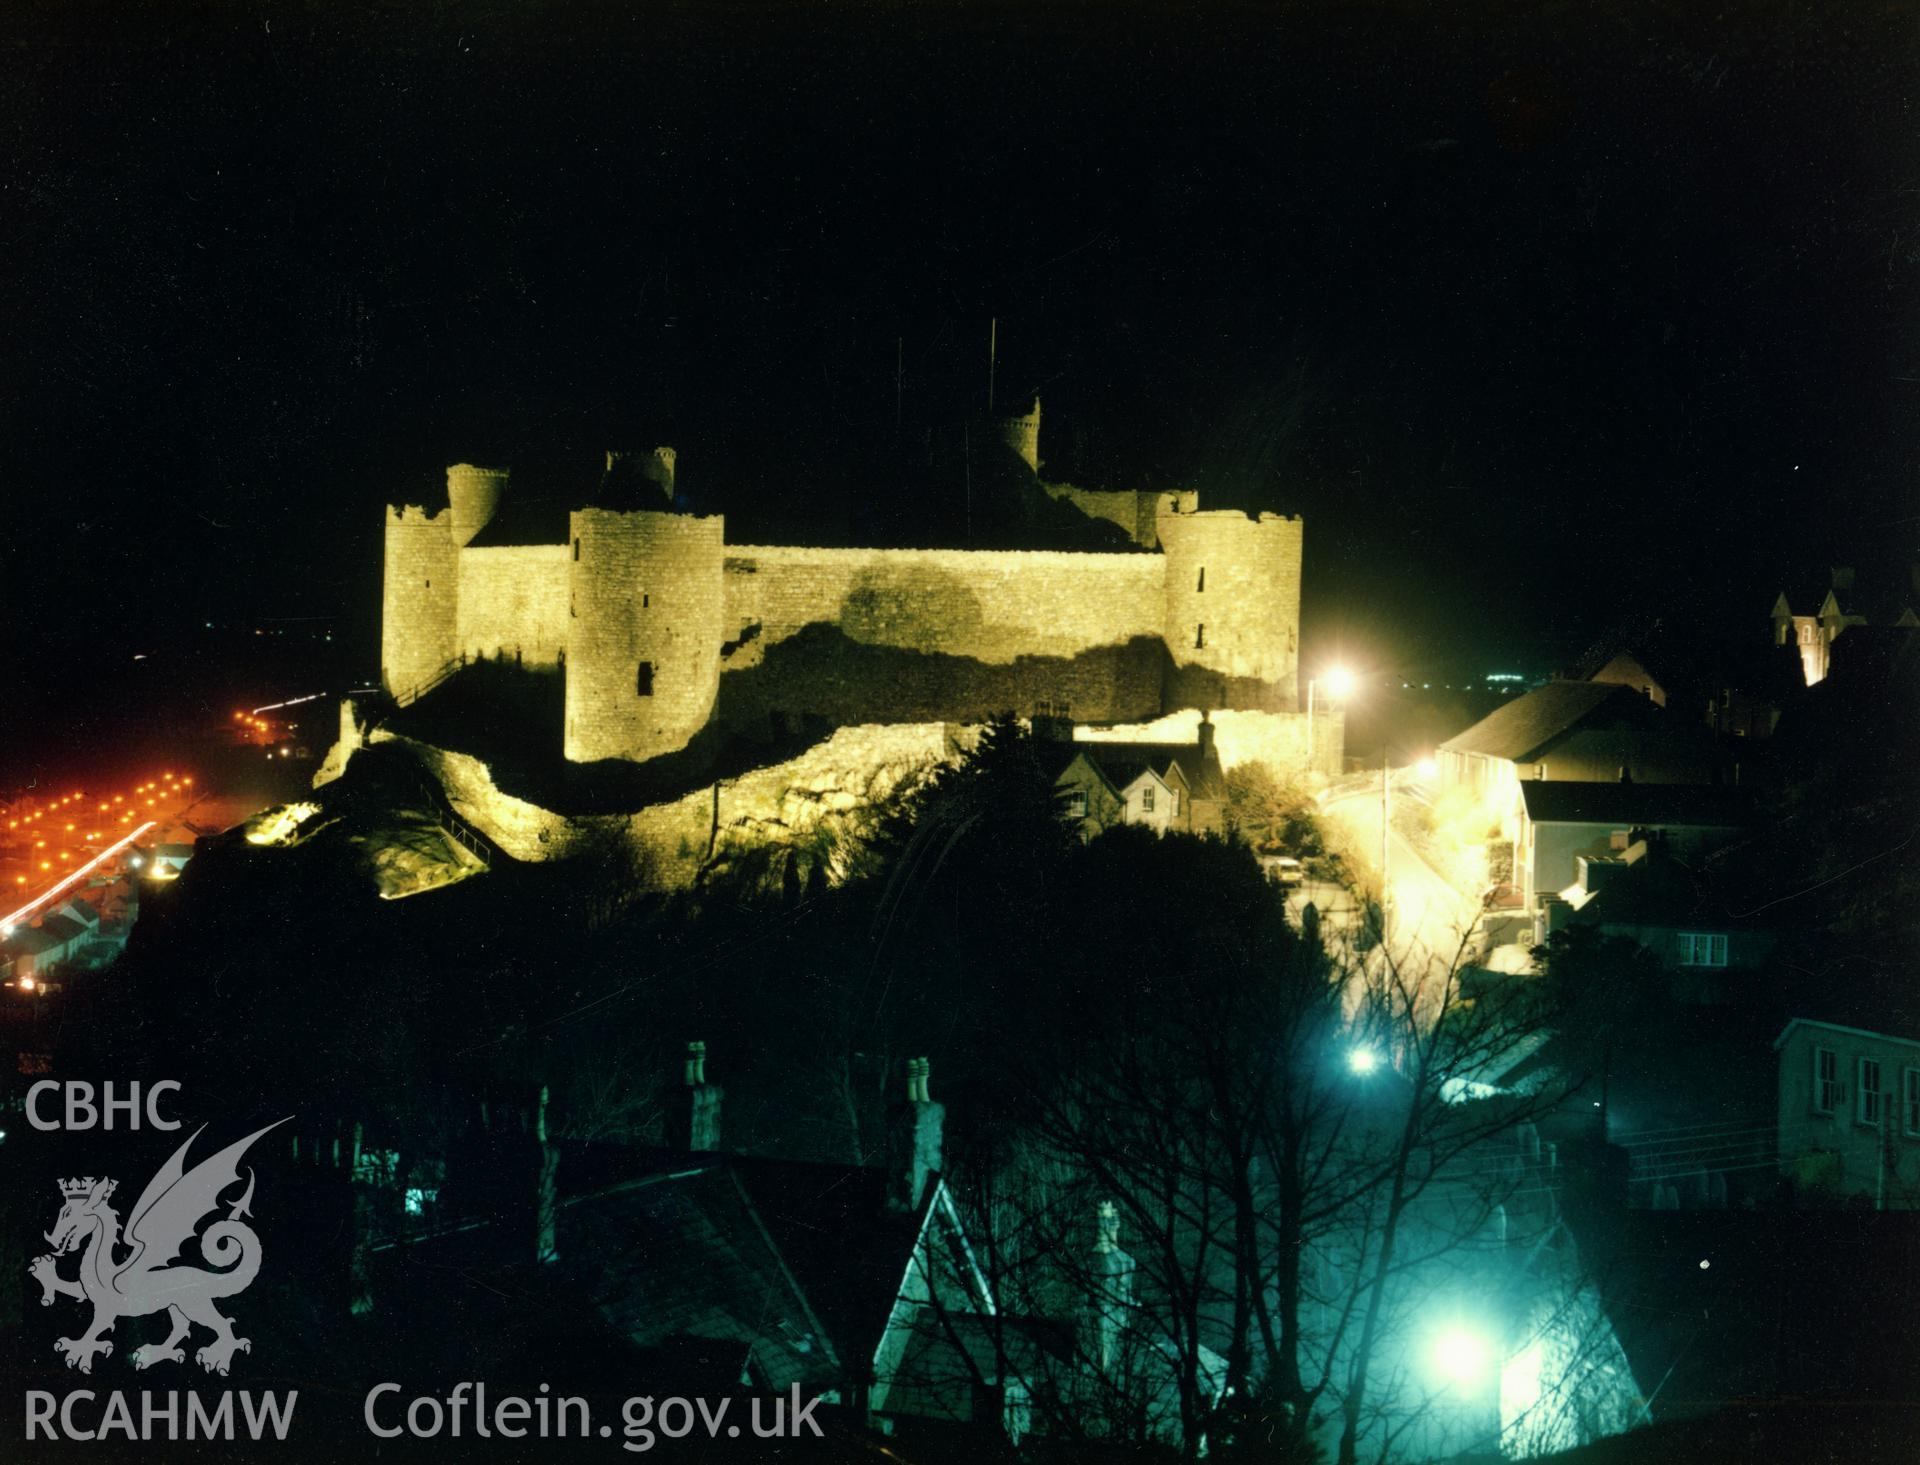 1 of a set of 5 colour prints showing view of Harlech castle at night, collated by the former Central Office of Information.